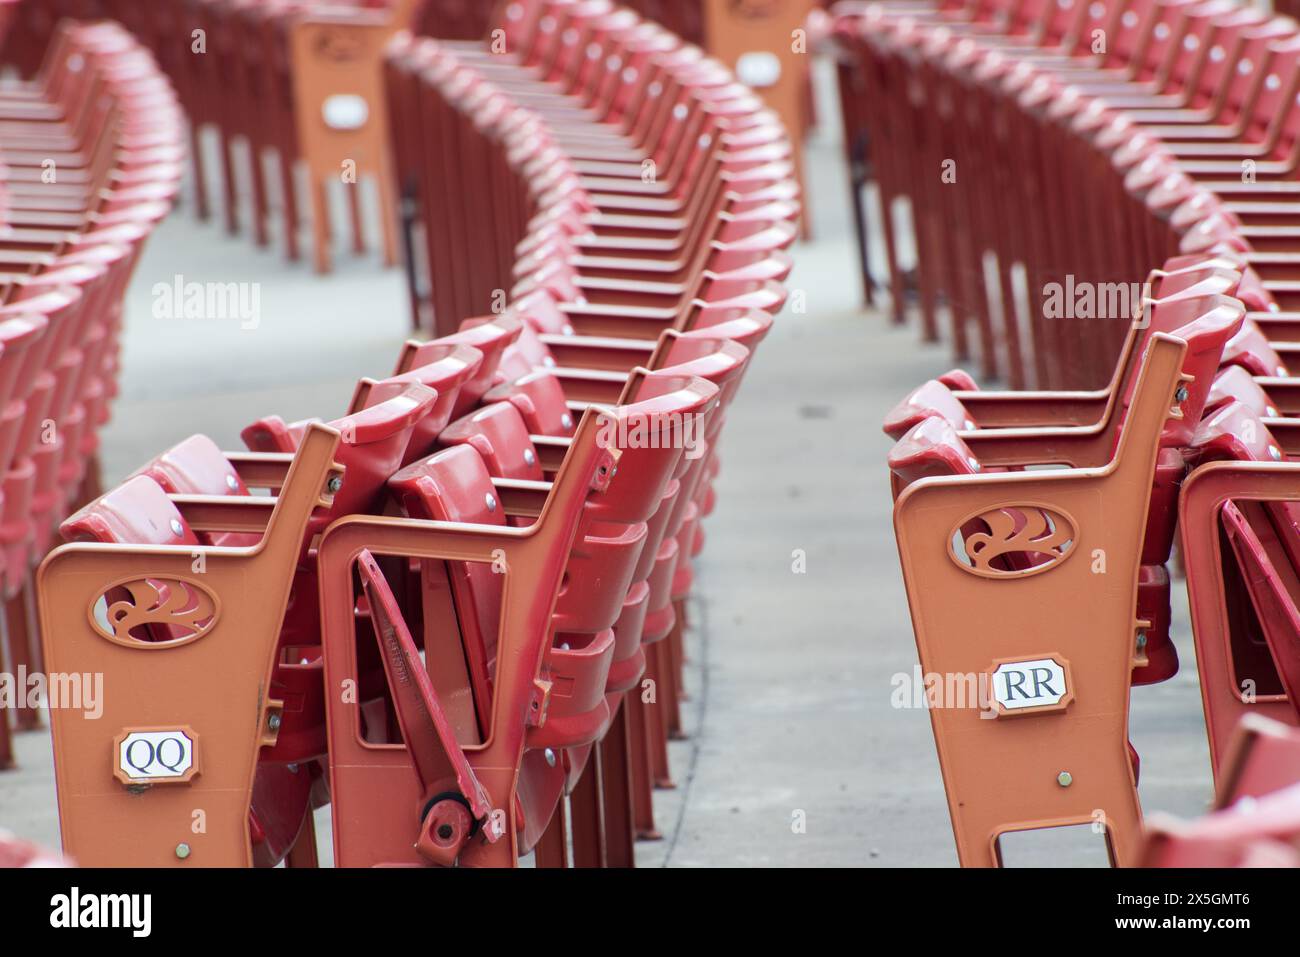 A row of red seats with wooden handles Stock Photo